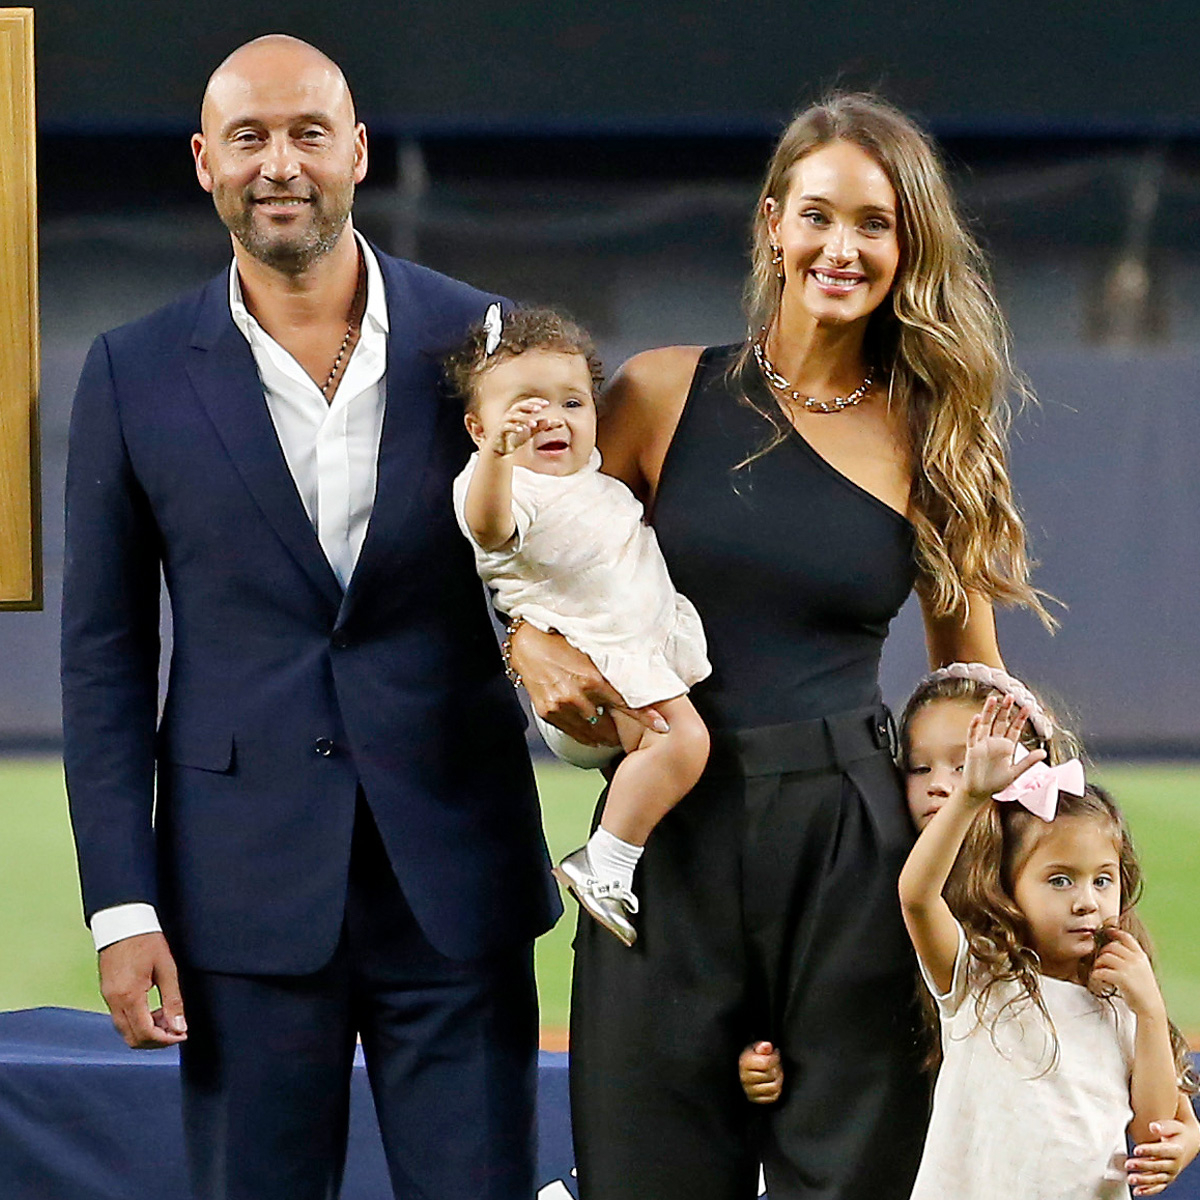 Amazing ride ends for Derek Jeter's dad, too – New York Daily News